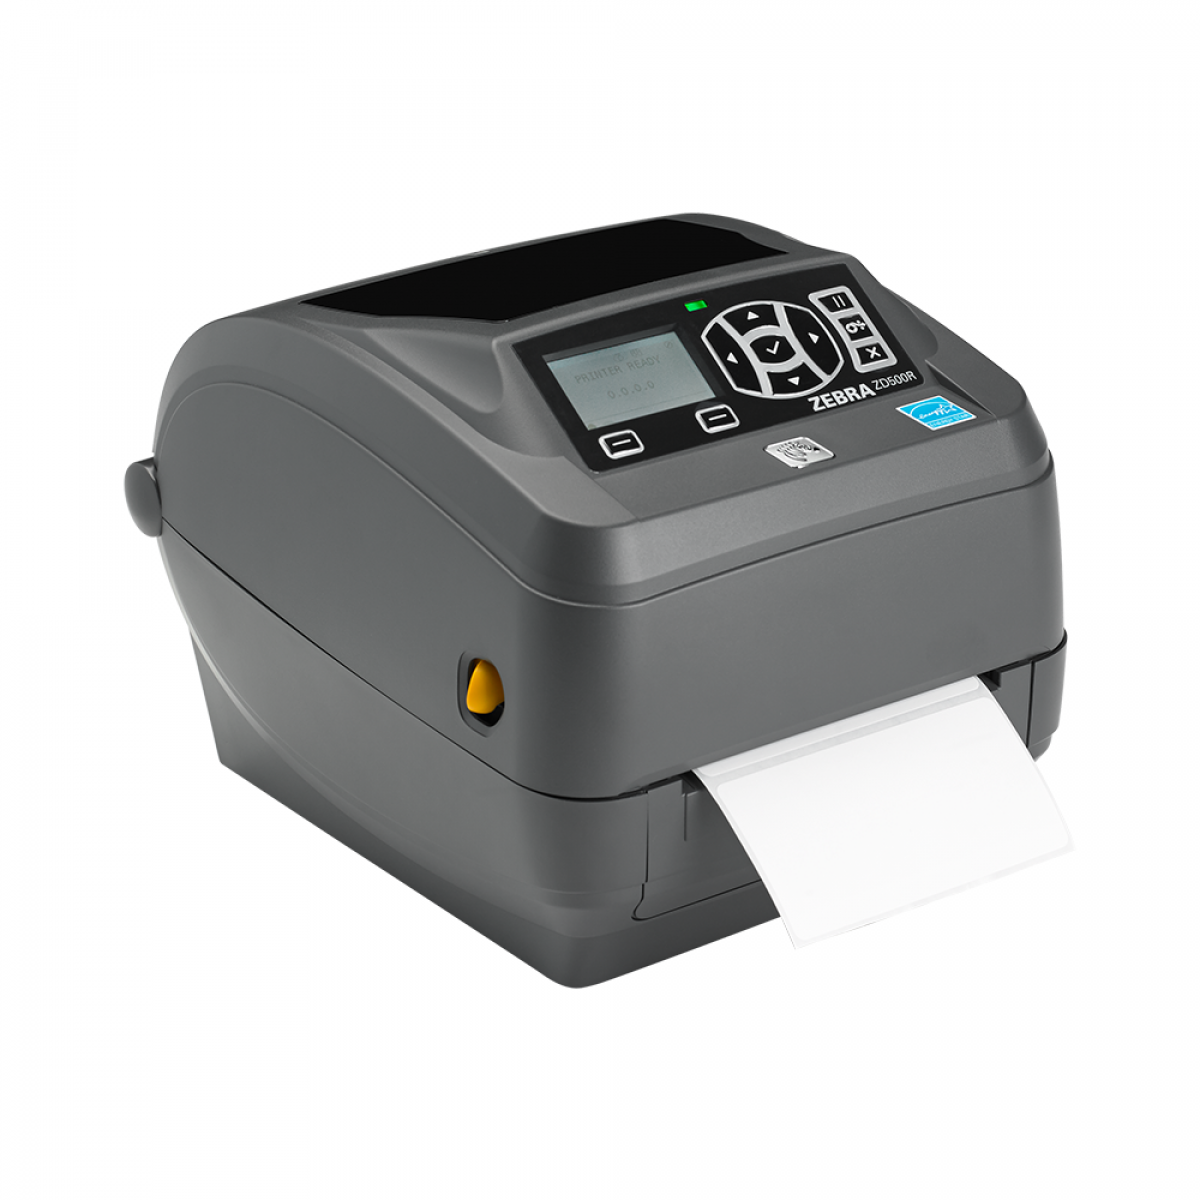 Zebra ZD500R RFID printer with label for healthcare applications